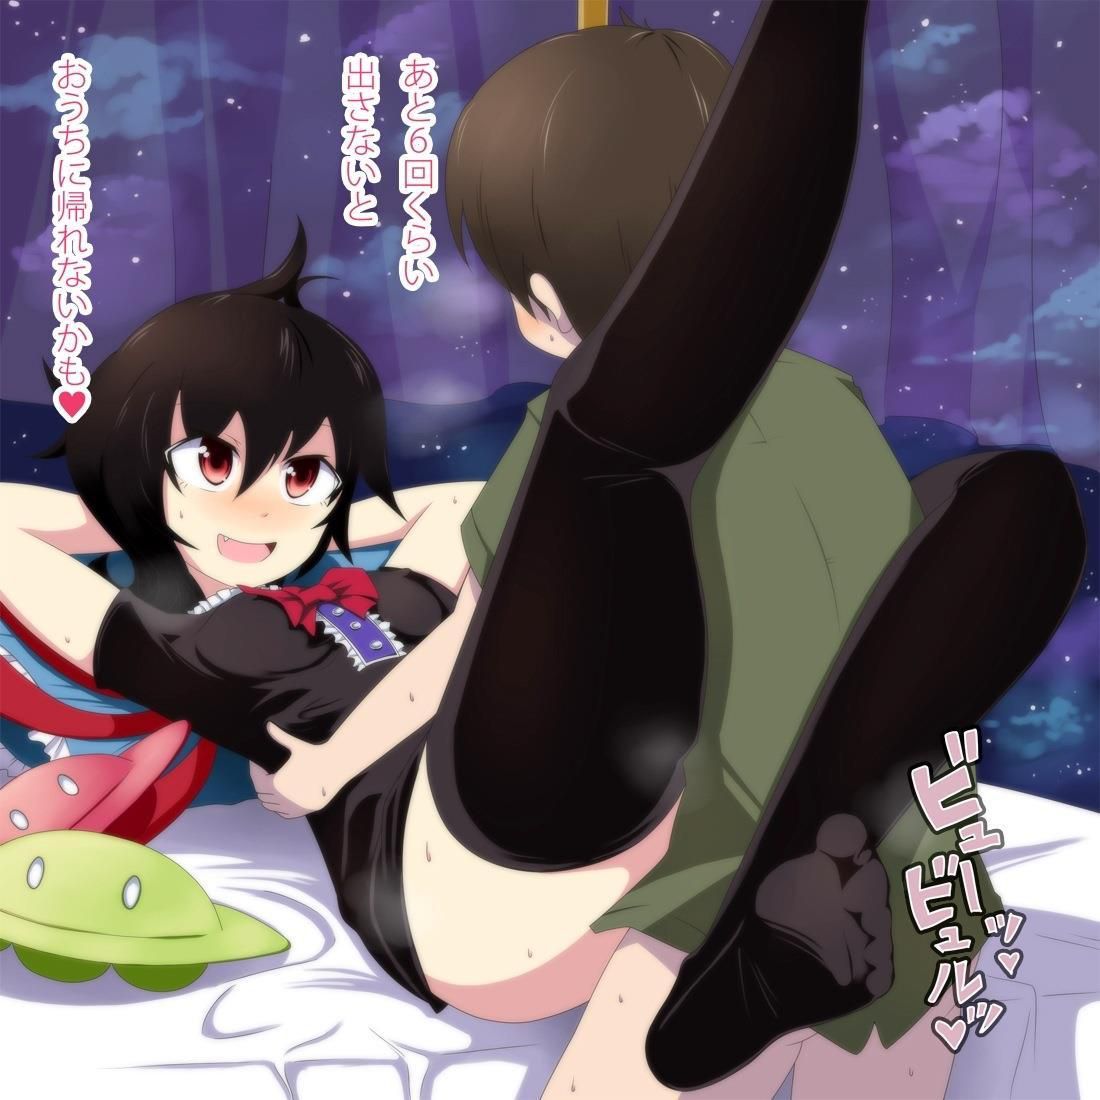 The small shota dick looks delicious...such a one-shota two-dimensional erotic image is too good 11